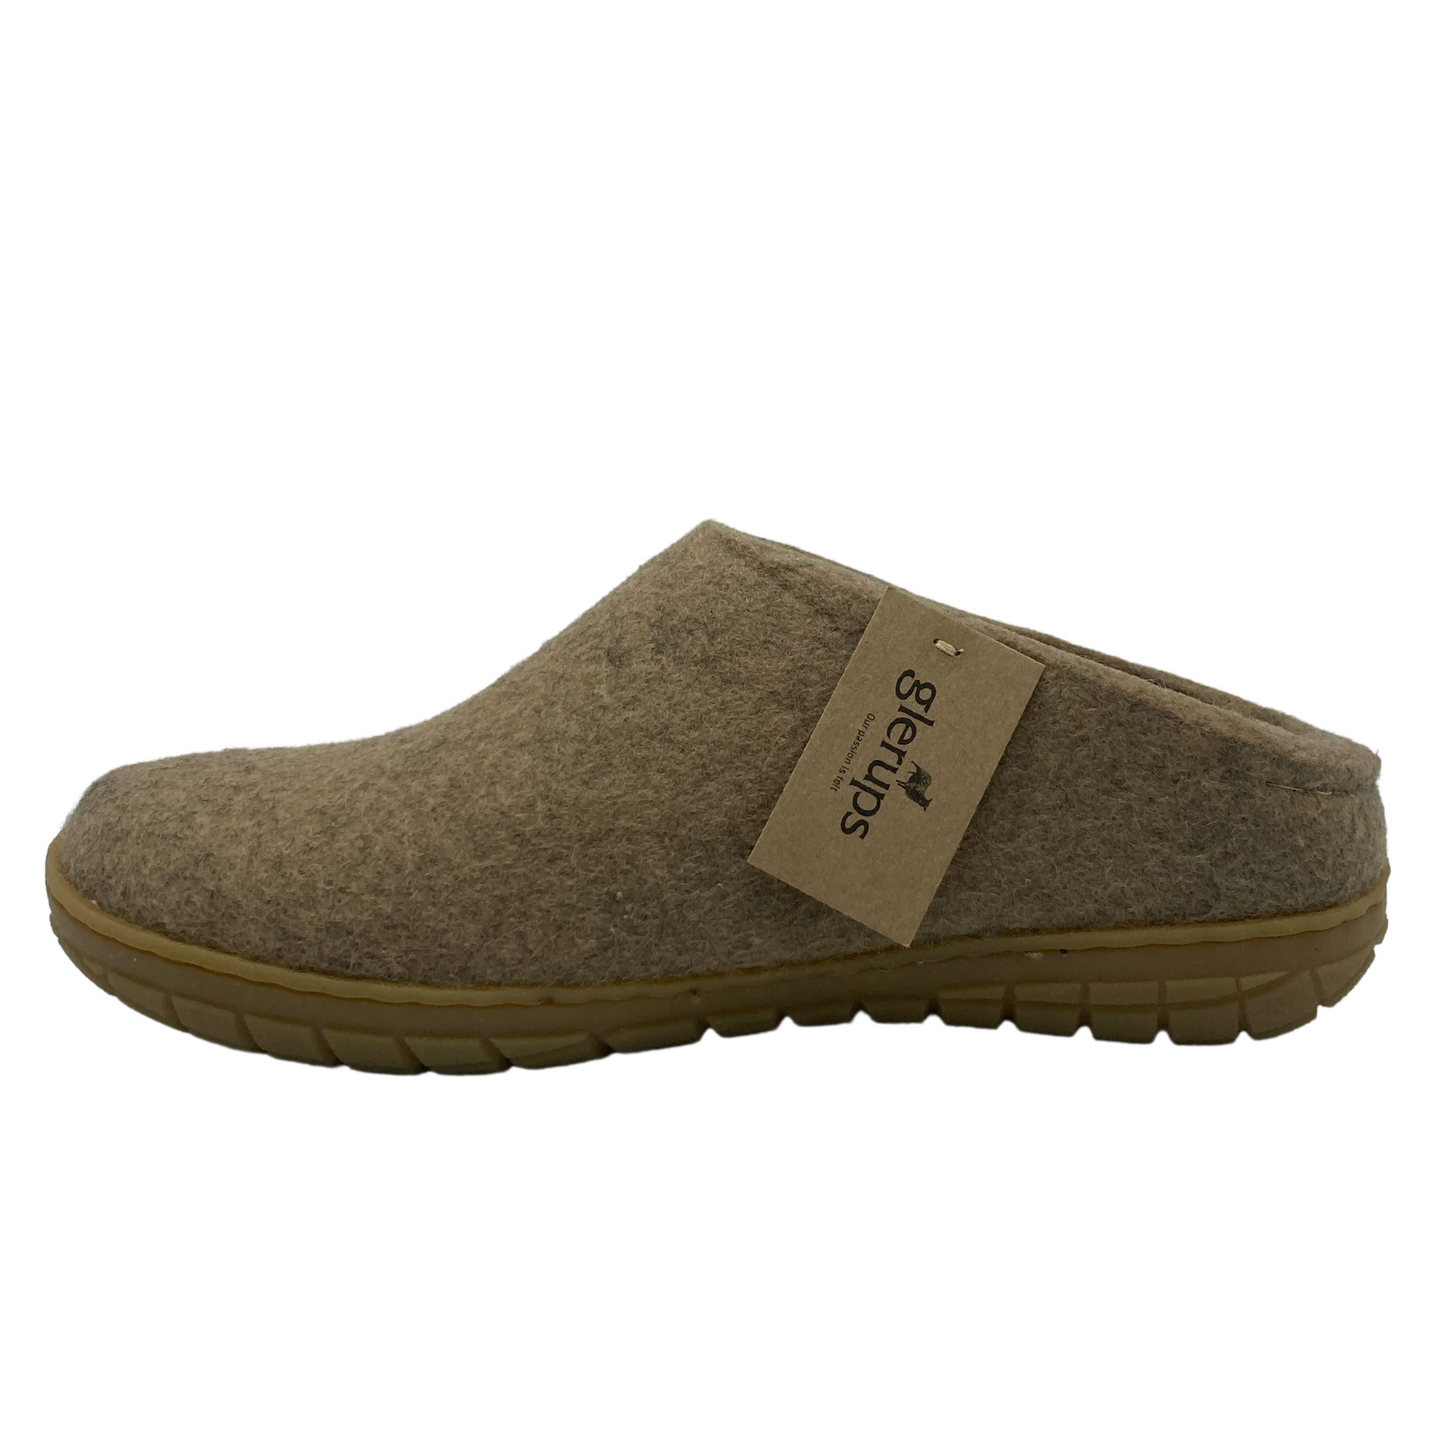 Left facing view of felted wool slip on shoe with brown rubber outsole